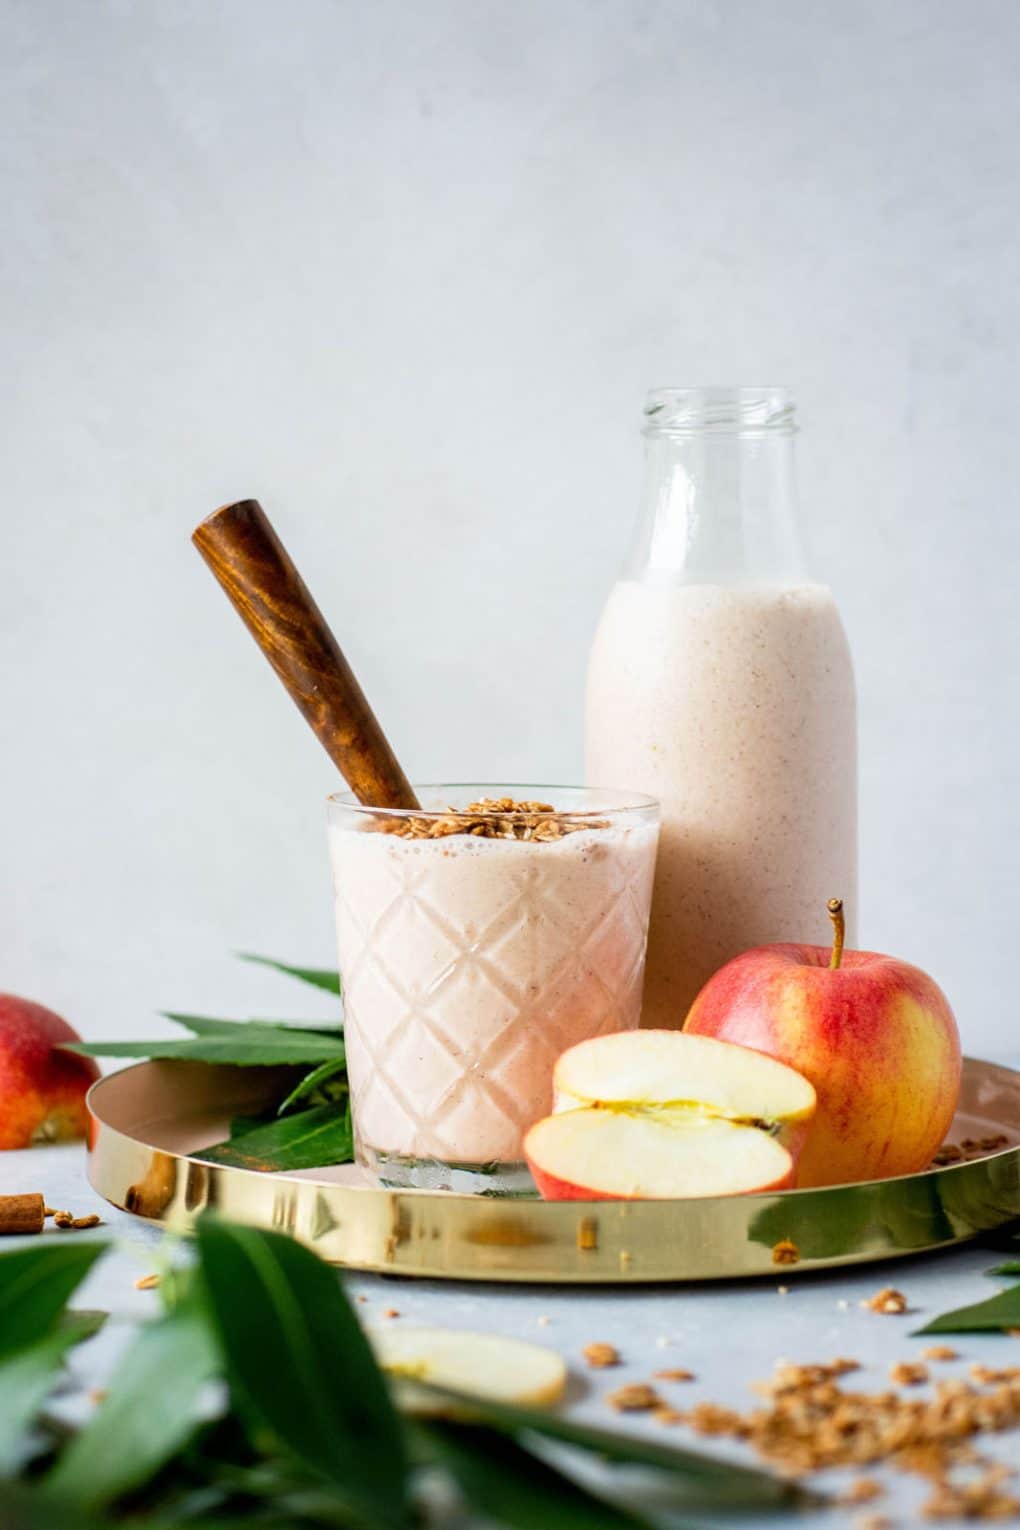 Glass full of cinnamon apple pie smoothie with a wooden handled spoon. Sitting in a gold rimmed round serving tray next to a larger jar of smoothie and surrounded by apples, scattered granola, greenery, and cinnamon sticks.